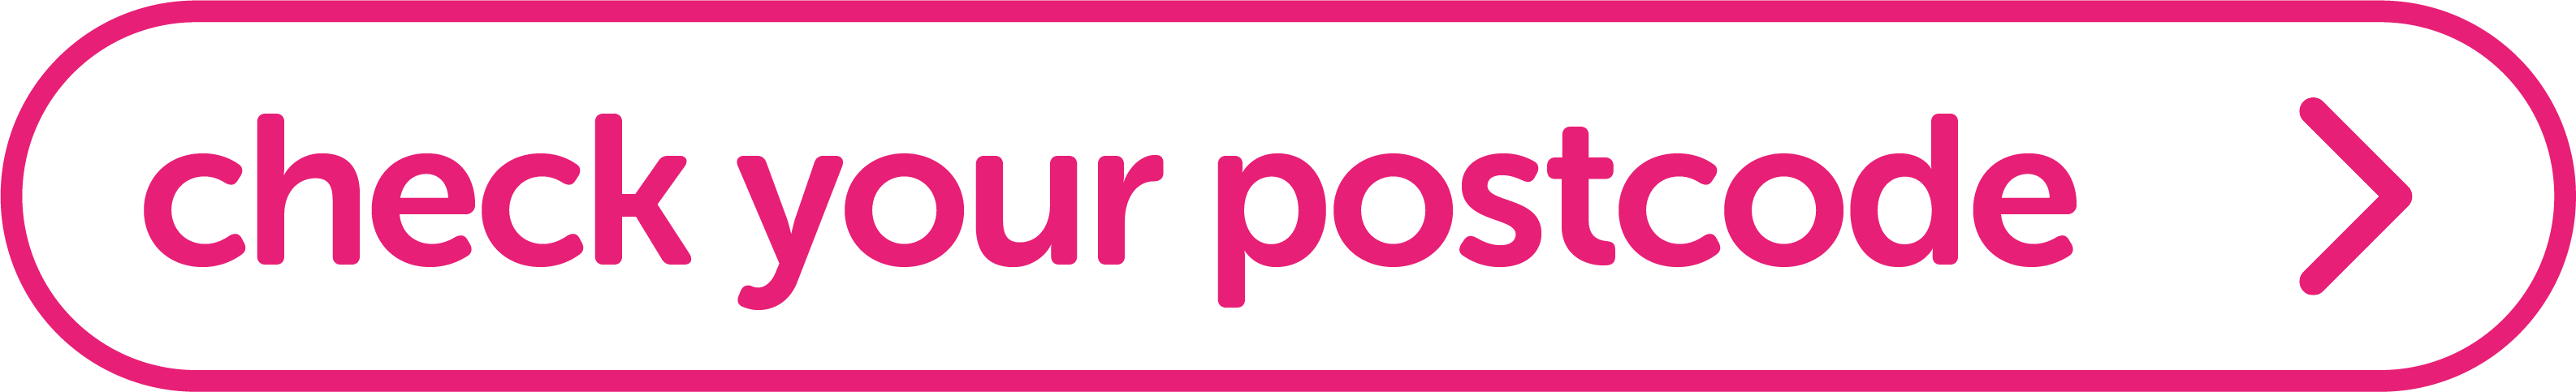 click here to check your postcode